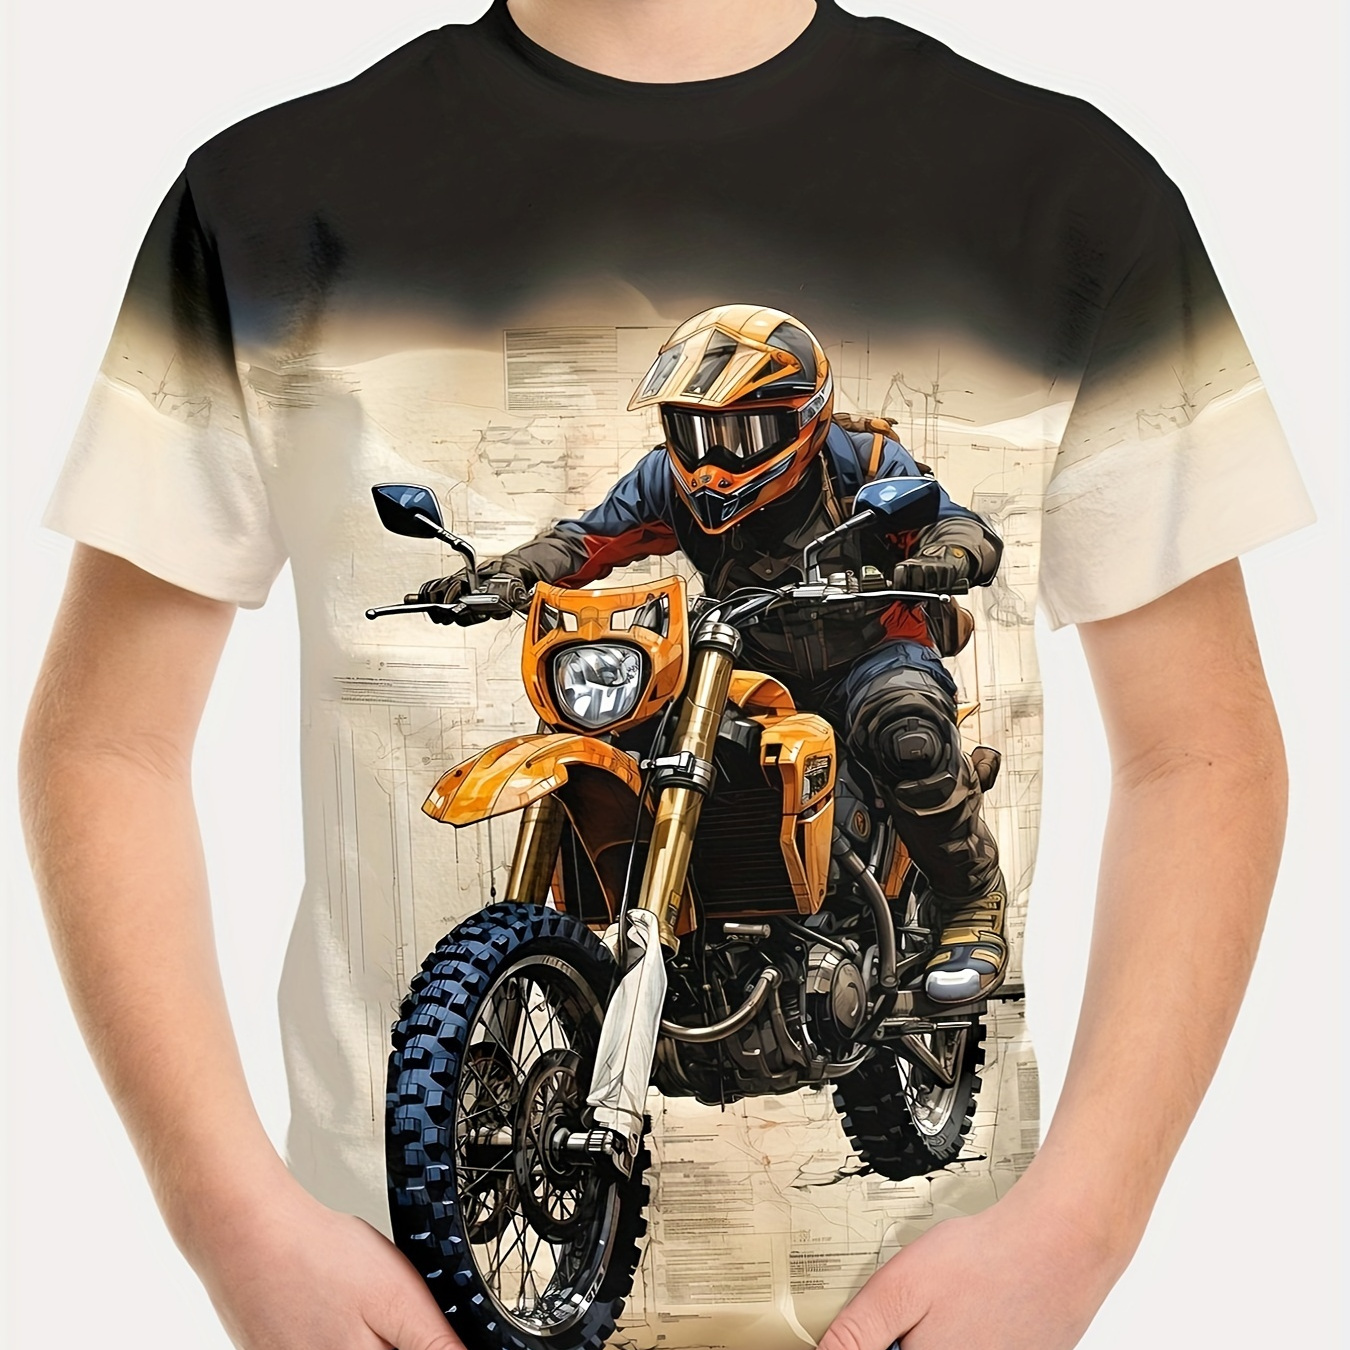 

Mountain Bike - Engaging Visuals With 3d Effect, T-shirts For Boys - Cool, Lightweight And Comfy Summer Clothes!